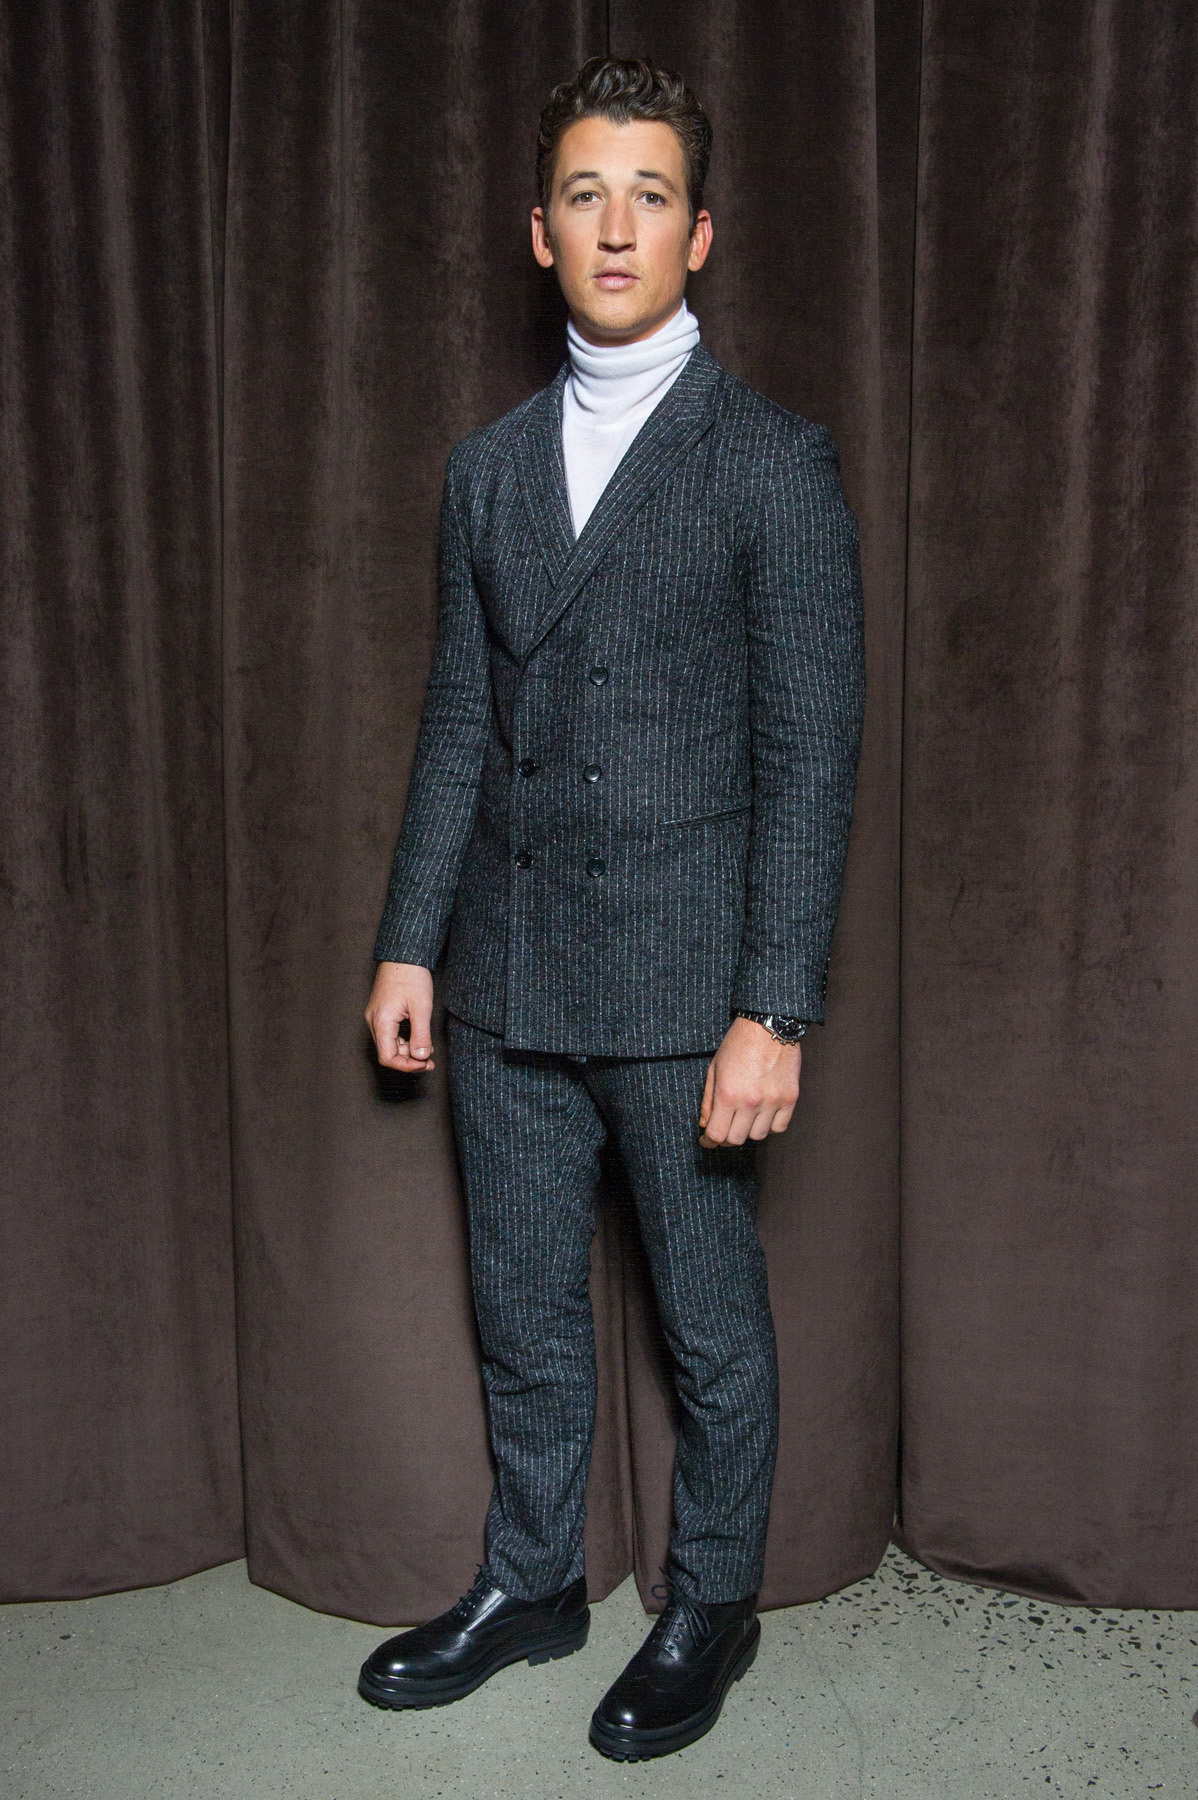 Miles Teller in HUGO BOSS at the BOSS Menswear Fall/Winter 2017 collection presentation